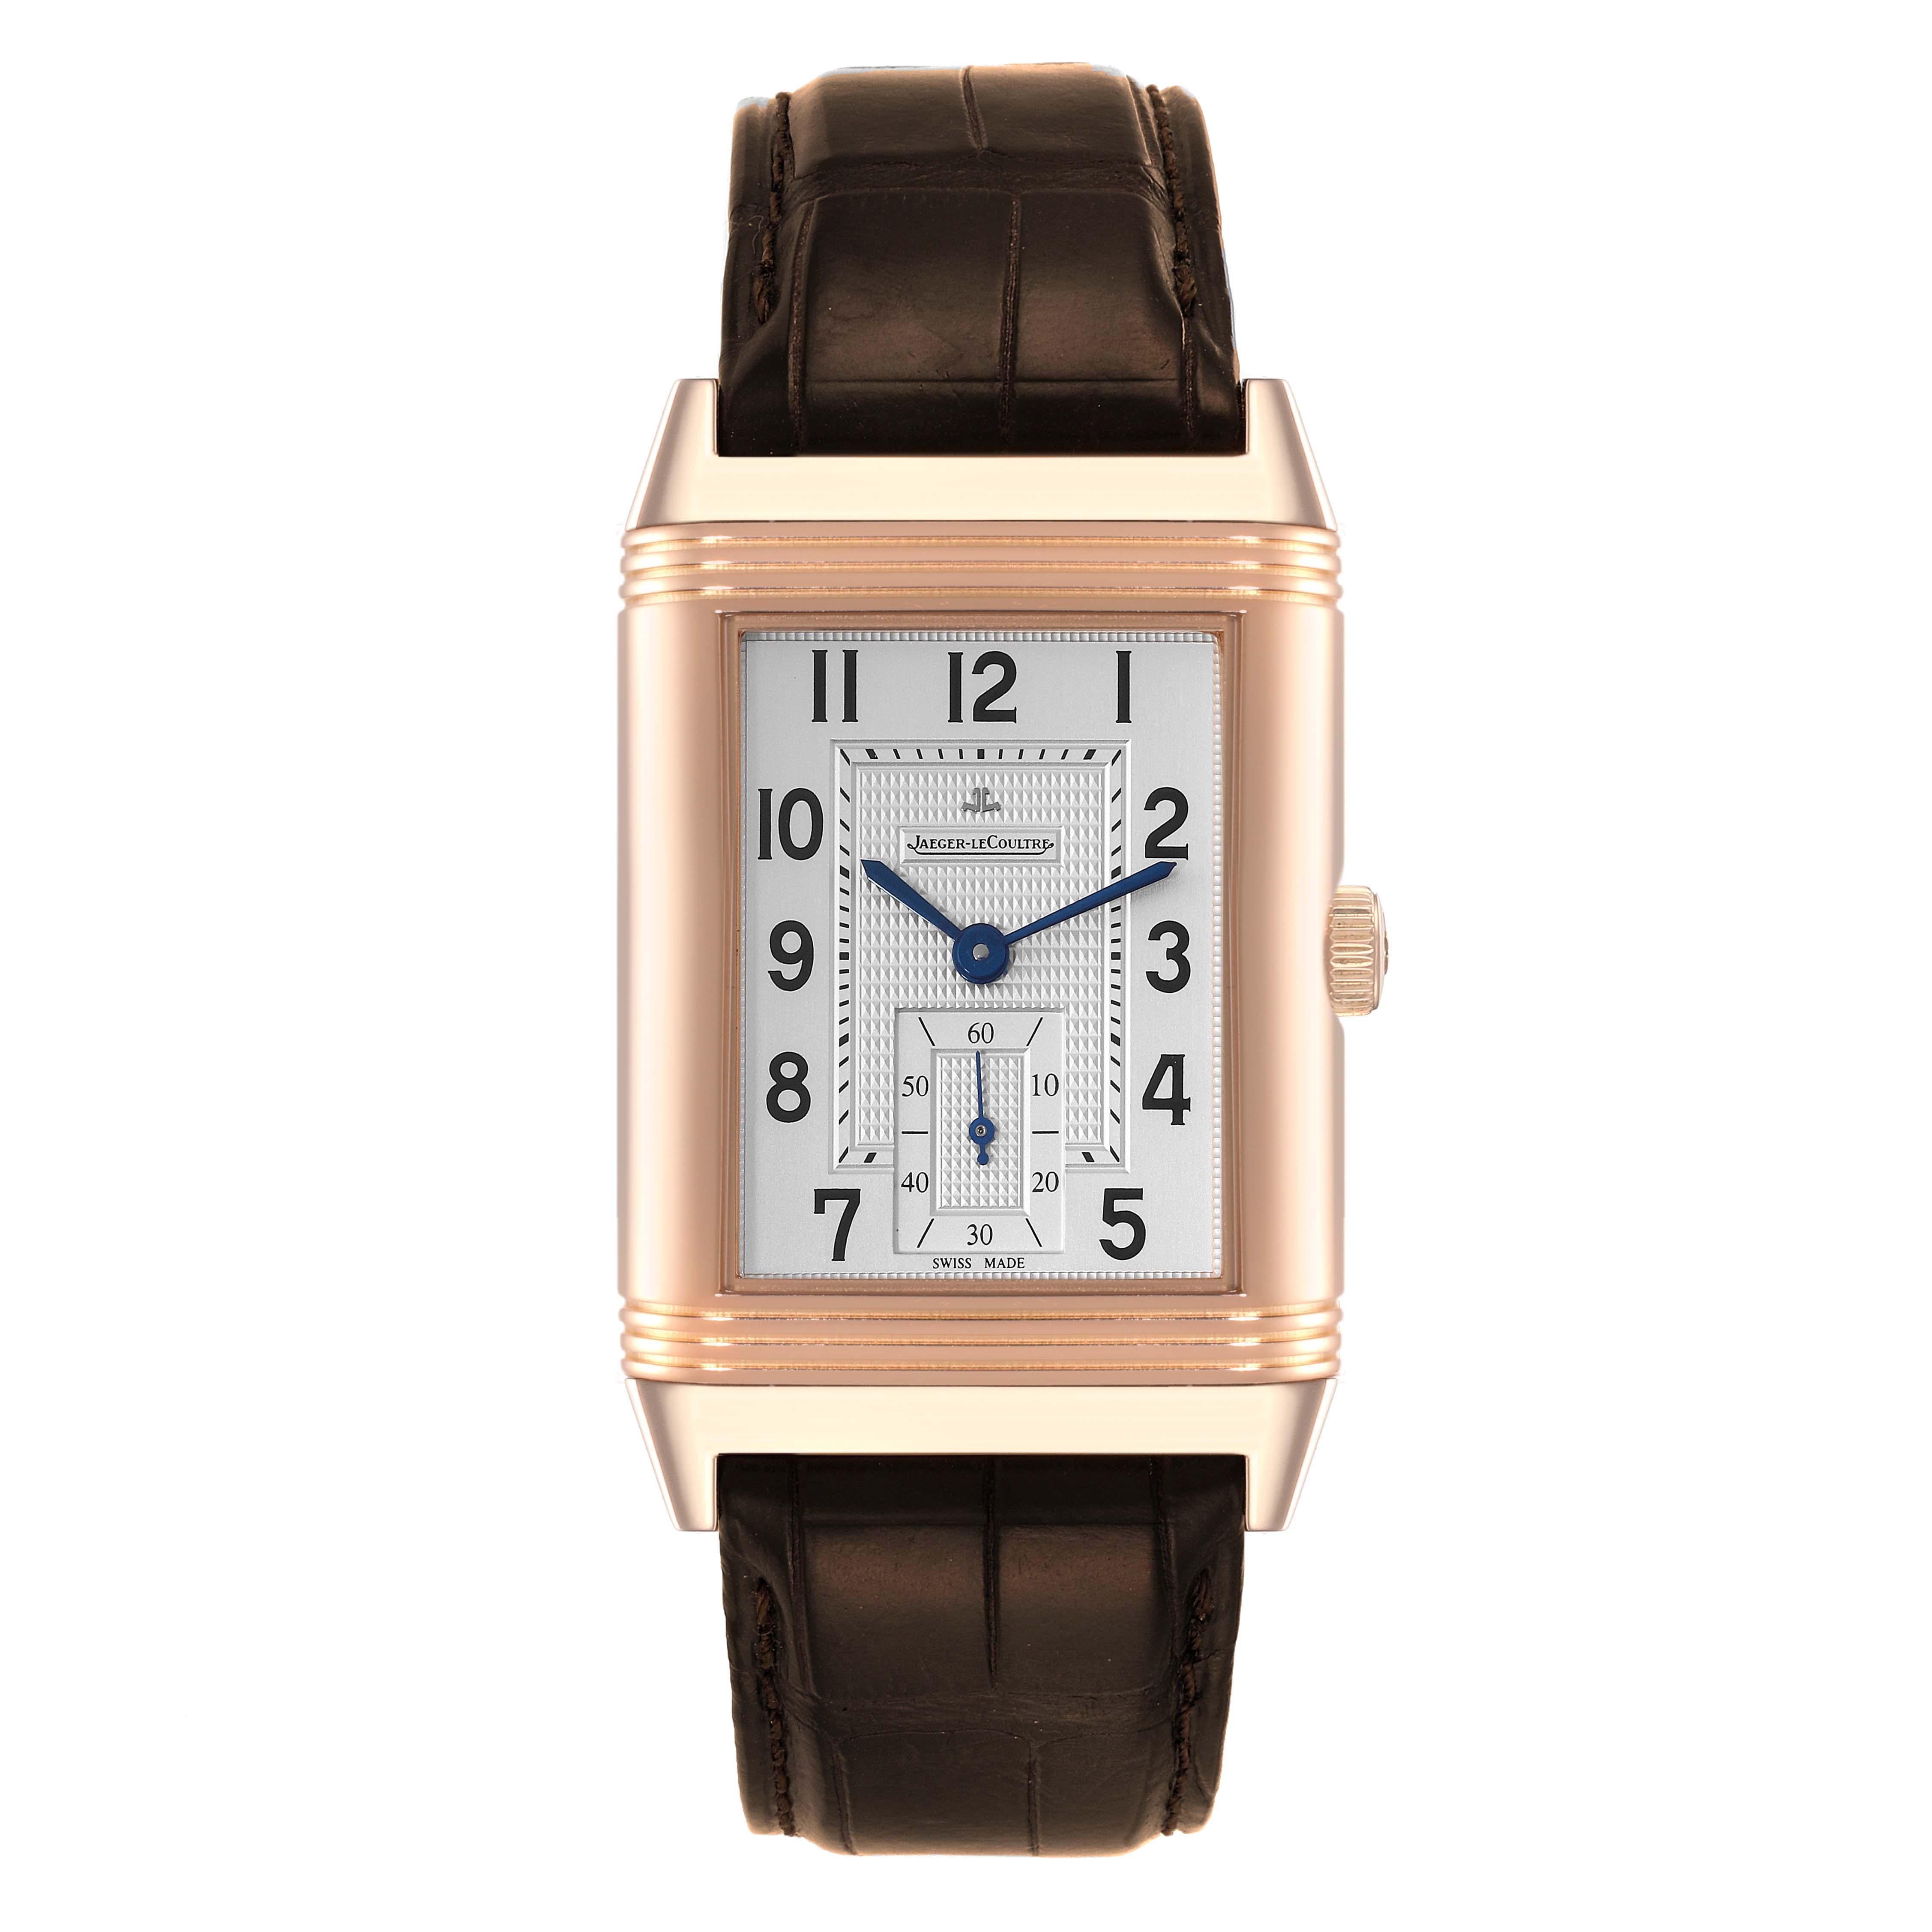 Jaeger LeCoultre Grande Reverso 976 Rose Gold Watch 273.2.04 Q3732420. Manual winding movement. 18K rose gold rectangular rotating case 48.5 x 30.0 mm. Case flips over to reveal a transparent exhibition sapphire crystal case back displaying the